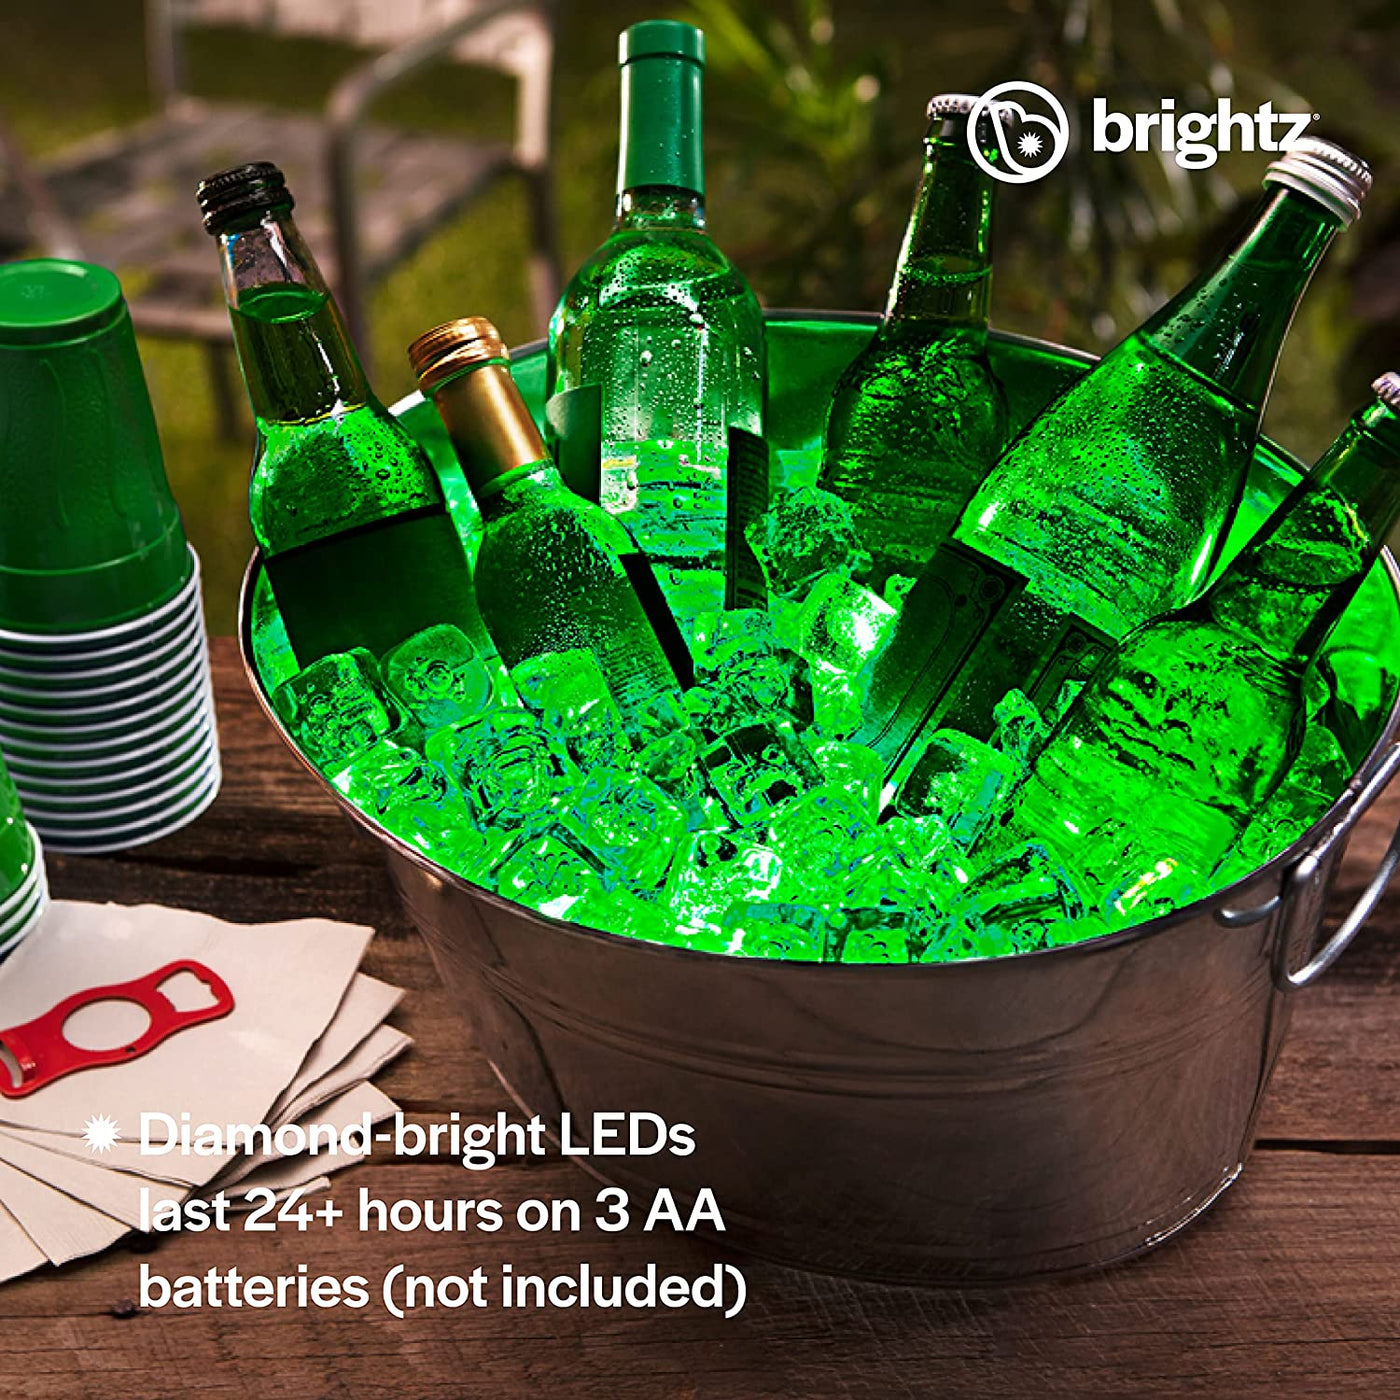 Brightz CoolerBrightz Can Shaped LED Ice Chest Light, Color Morphing - Waterproof Color Changing LED Light for Inside Coolers - Great for Camping, Tailgating, Backyard BBQ, Parties, and More